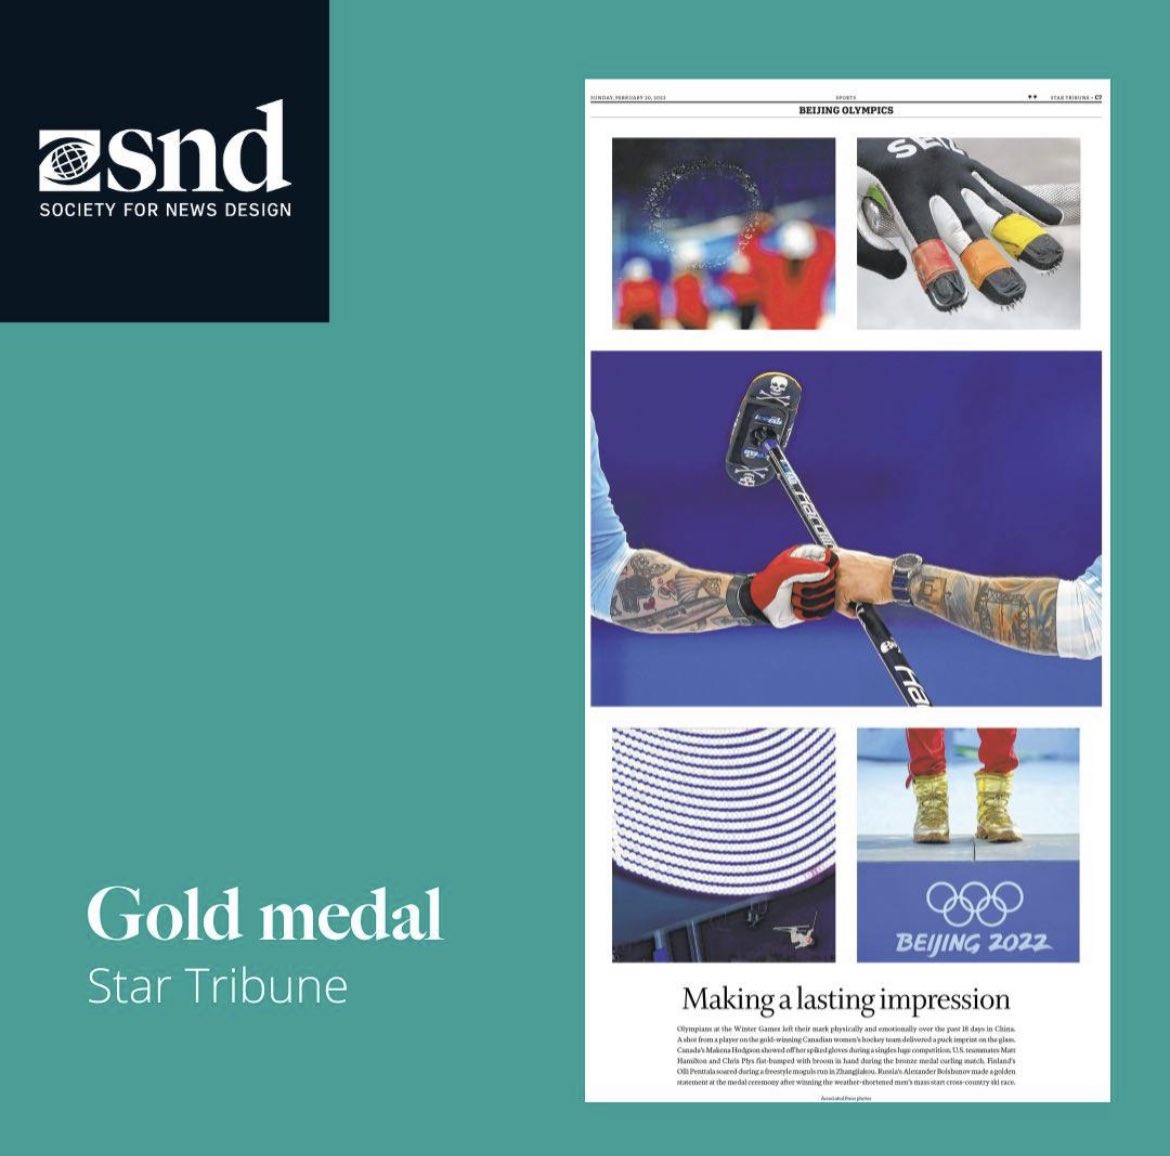 WOW! Extremely happy to learn that my Olympic preview illustrations for the @startribune were part of a gold medal winning package at the @SND ! Huge congrats to @badgerzip2002 & co, thanks for having me on board! #snd44